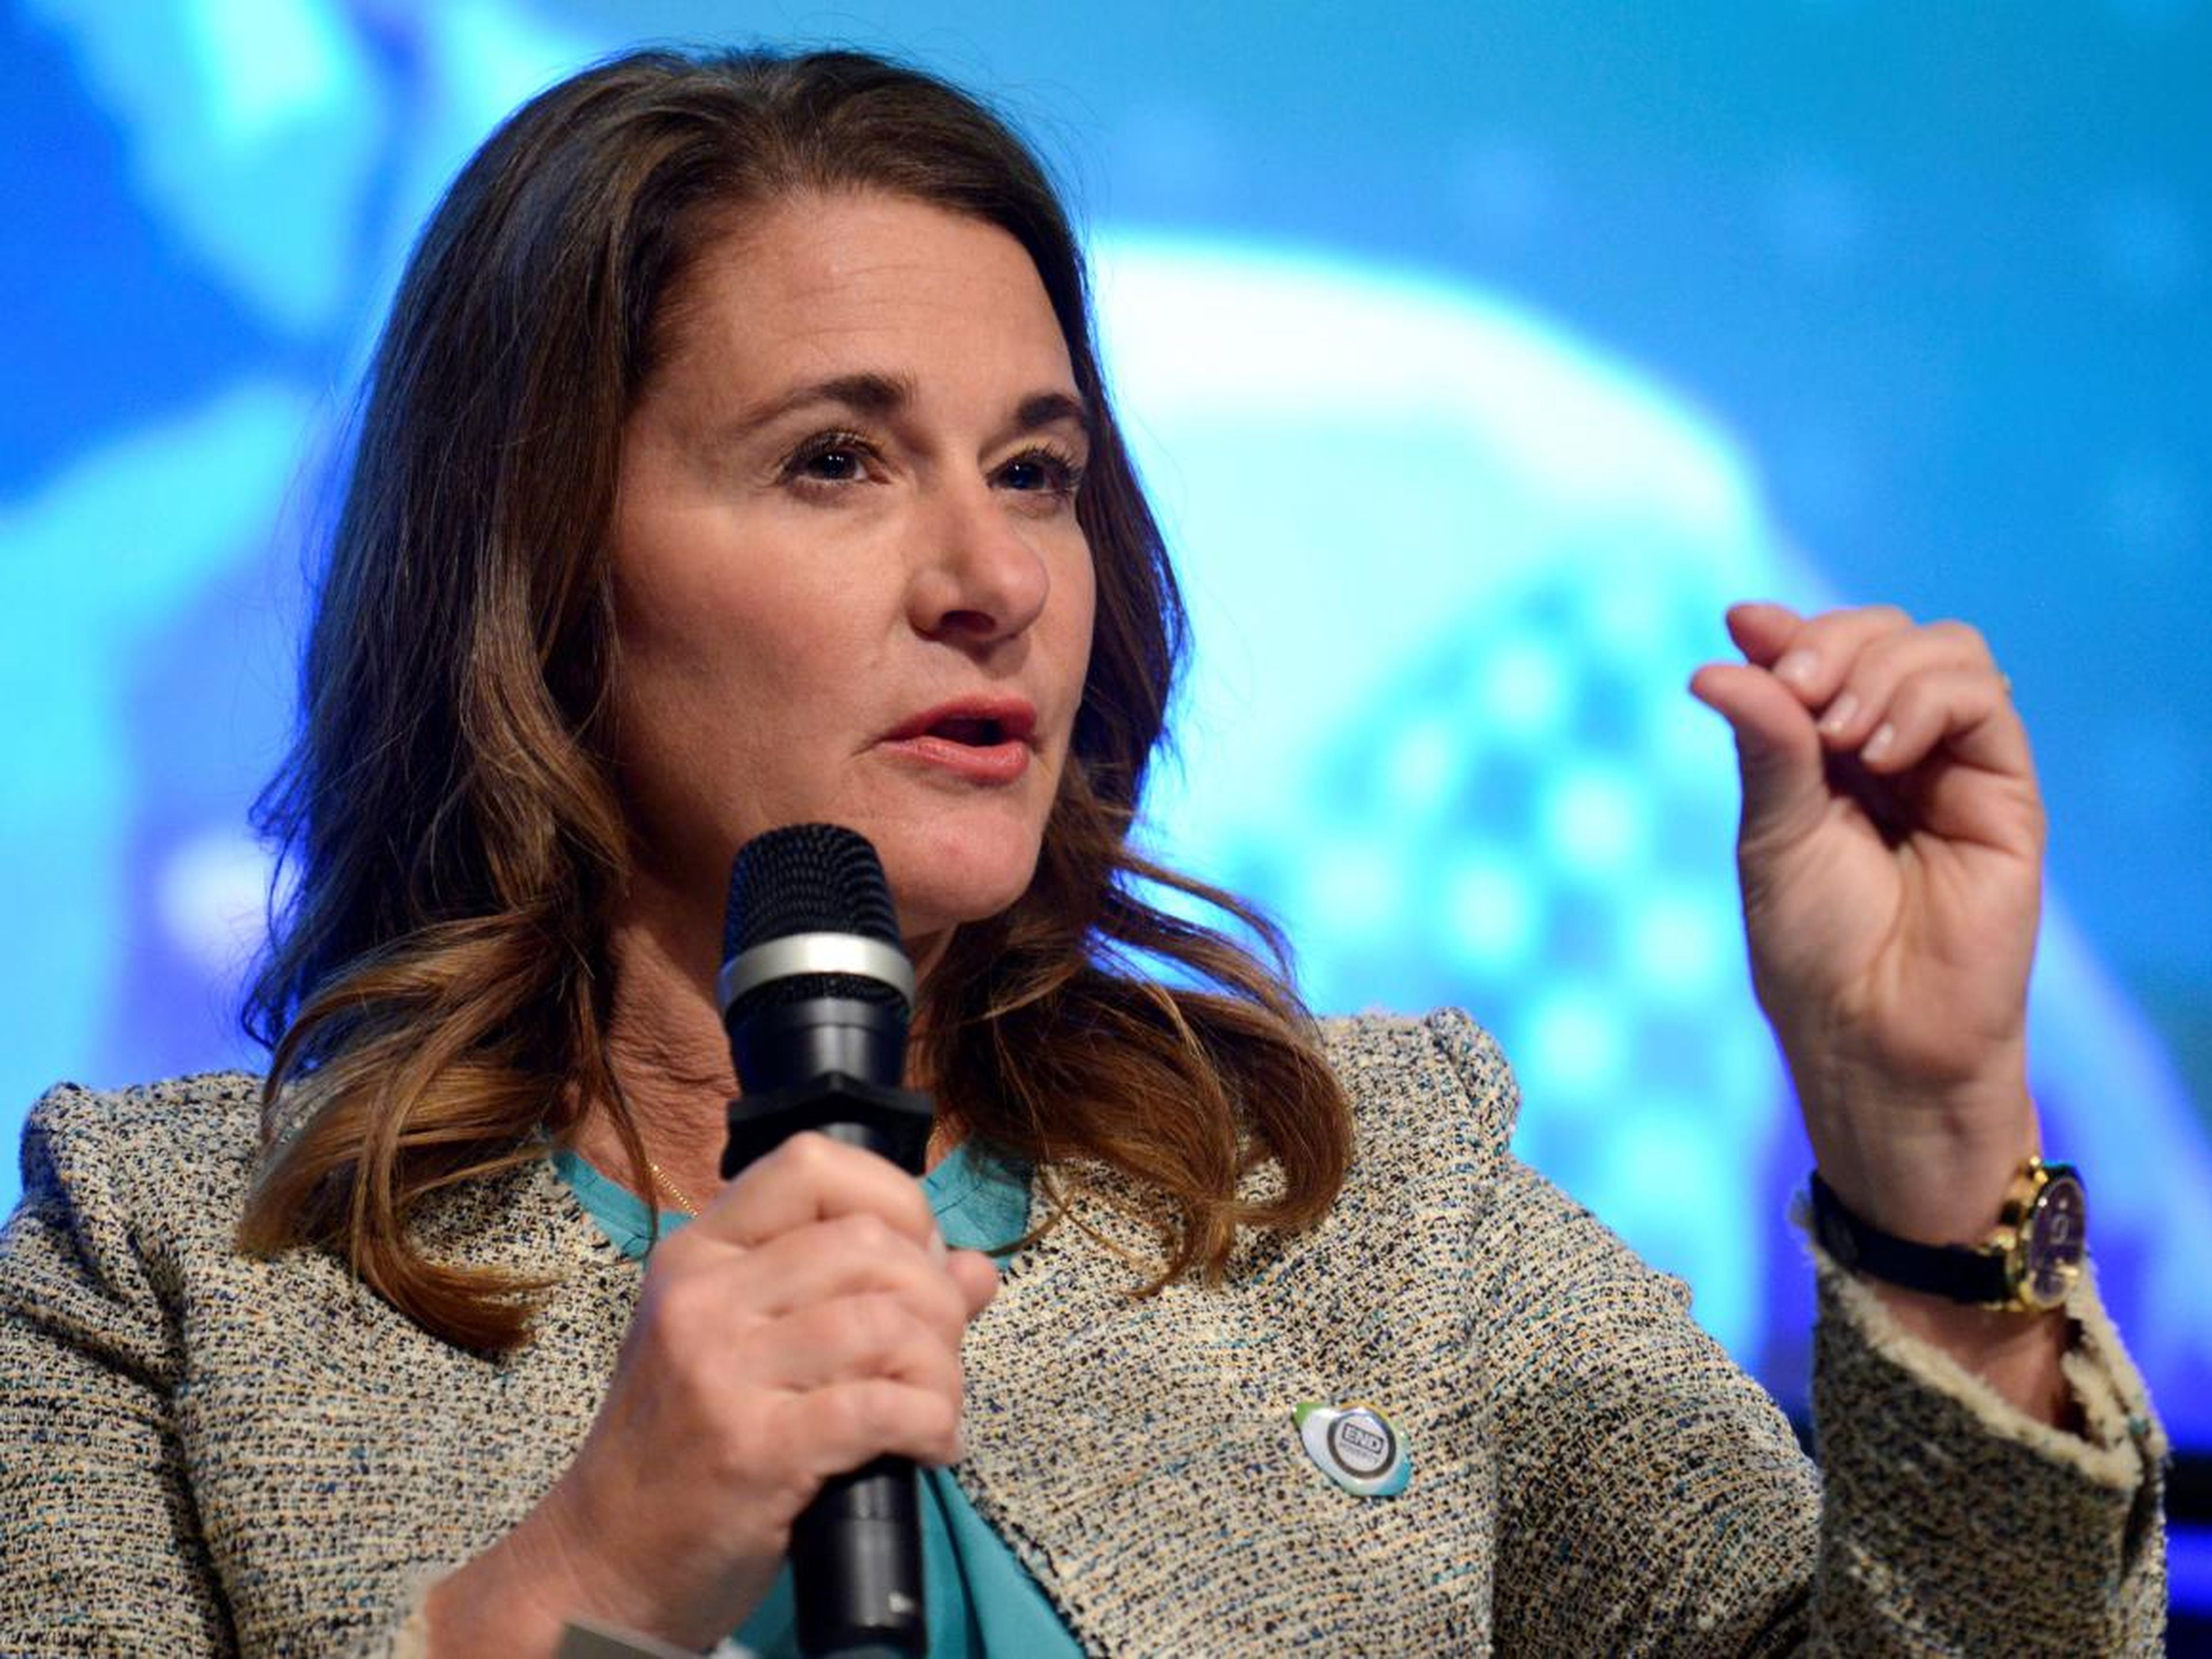 Co-Chair of the Bill & Melinda Gates Foundation Melinda Gates makes remarks during a panel discussion on investing in adolescents to improve nutrition, education, etc as part of the IMF and World Bank's 2017 Annual Spring Meetings, in Washington, U.S.,